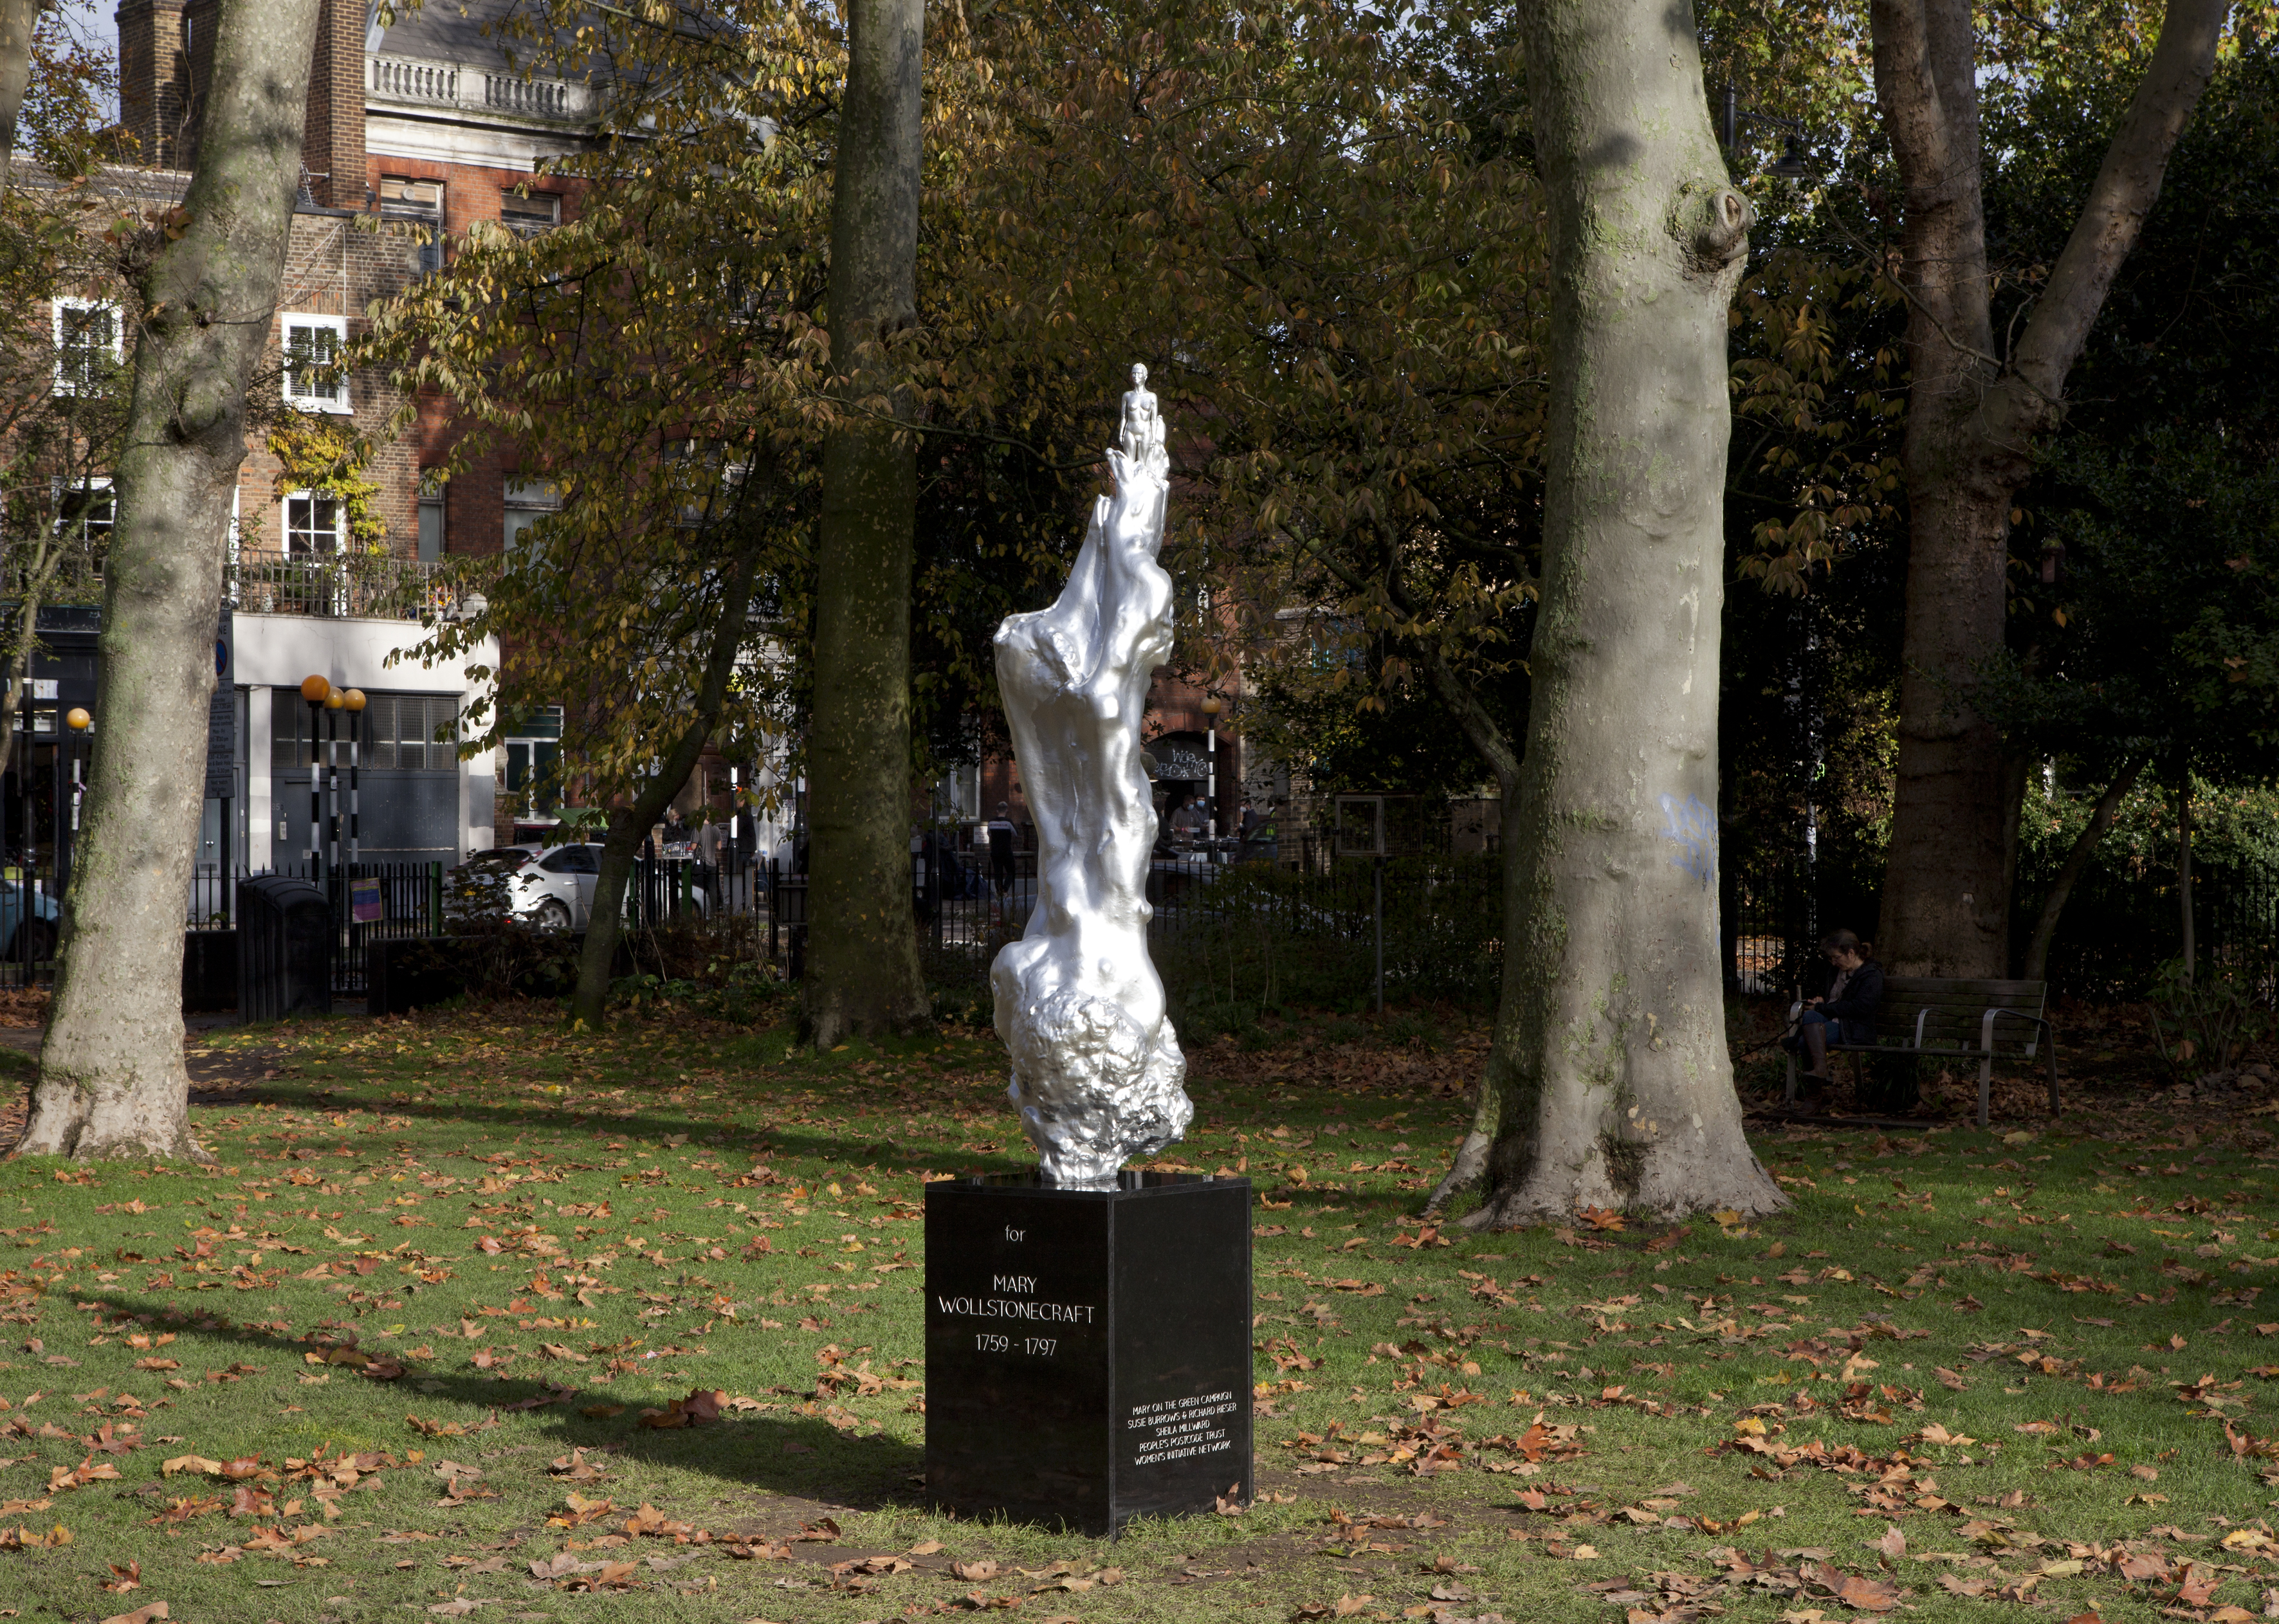 photo of a silver statue of Mary Wollstonecraft, whose body merges into a wave-like column